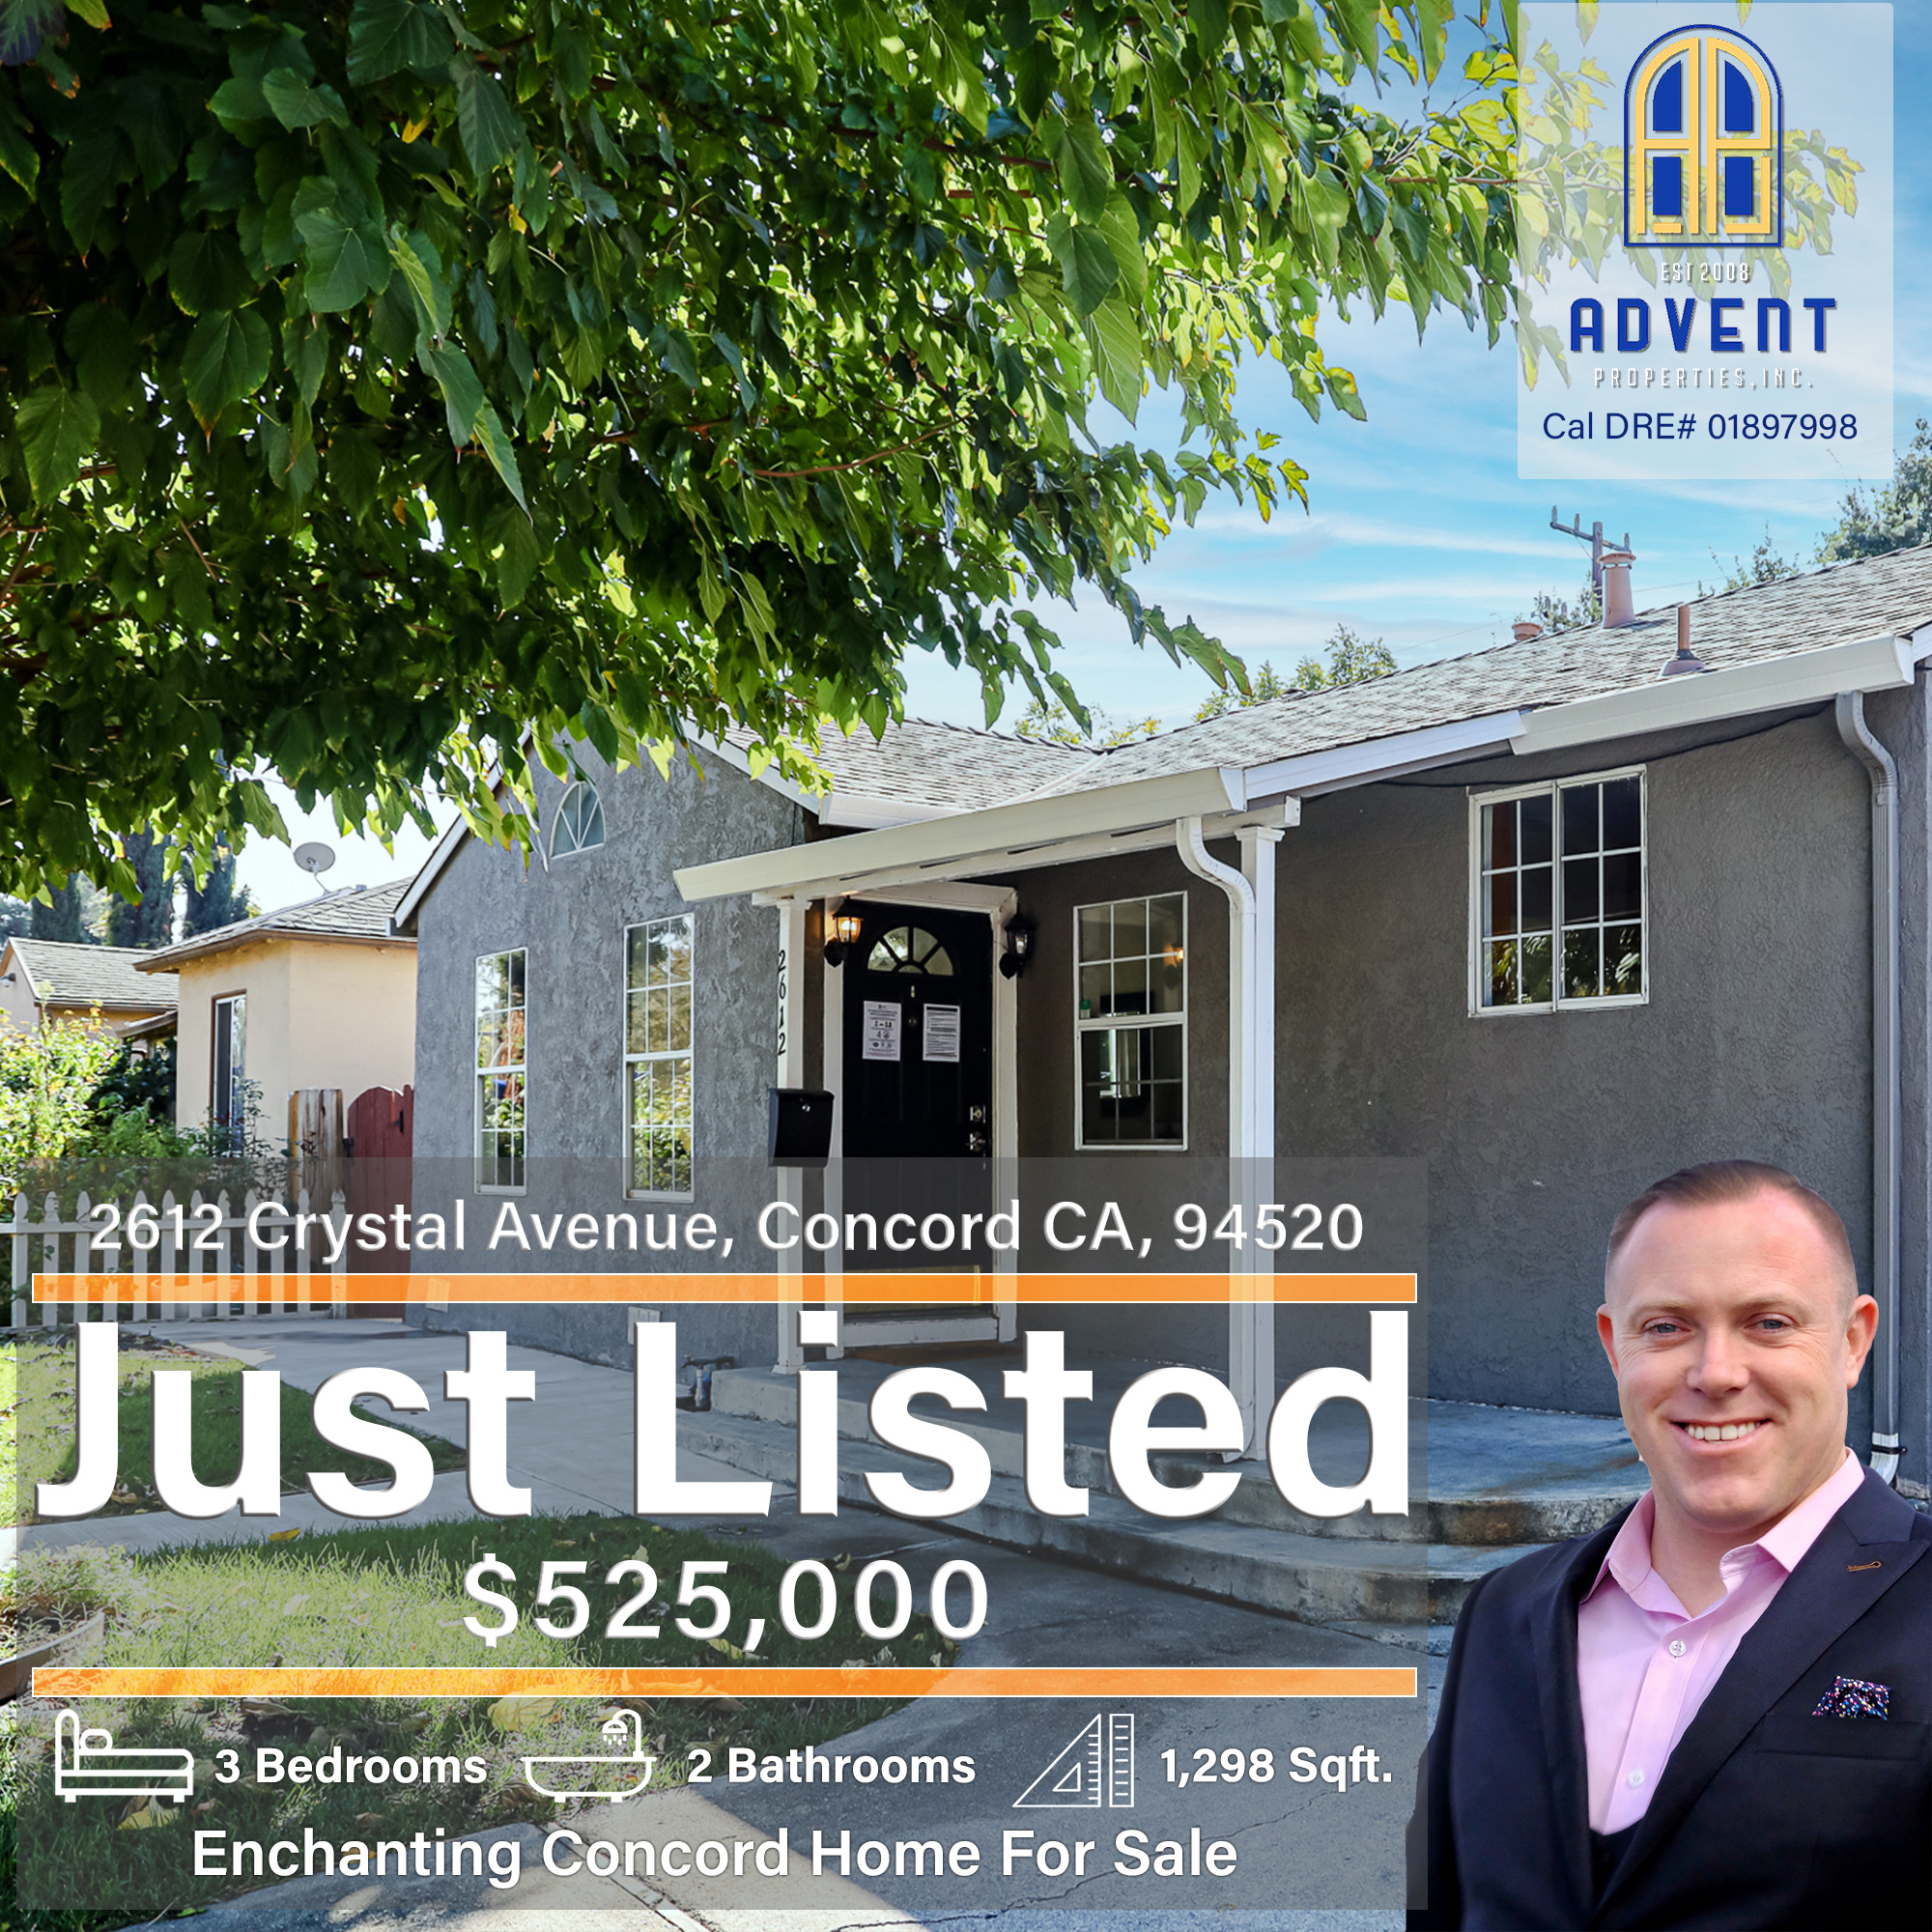 Just Listed by Darryl Glass: 2612 Crystal Avenue, Concord, CA 94520